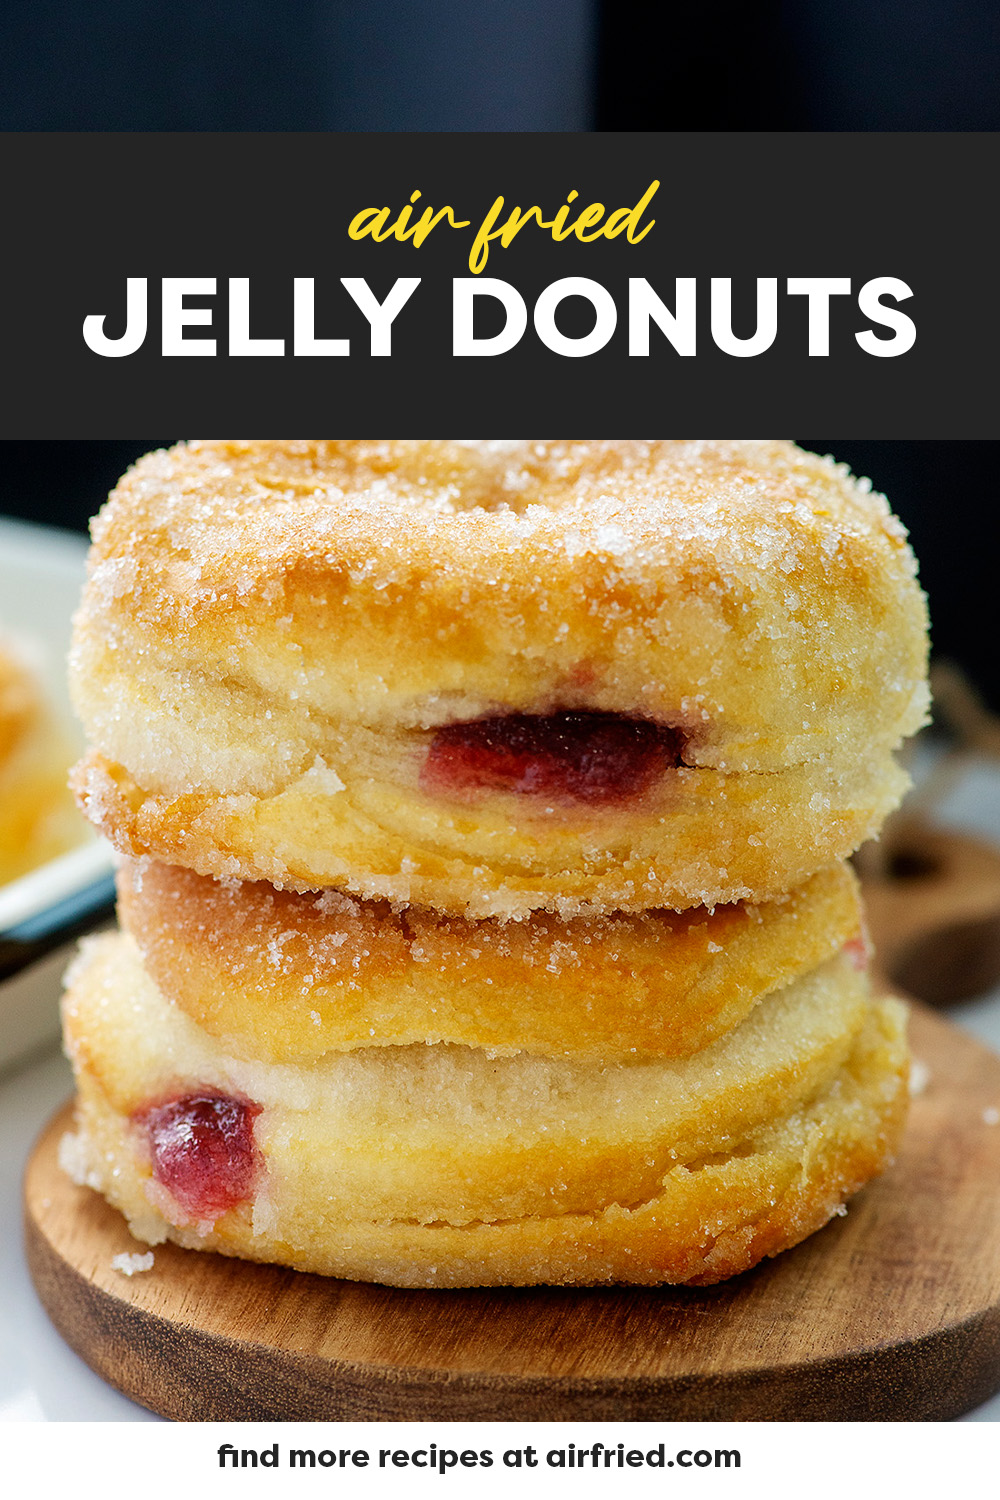 Making air fryer jelly donuts at home is so easy, with just 4 ingredients! These take less time than hitting up the local donut shop and they turn out so warm and fluffy, filled with raspberry jelly, and tossed in sugar!